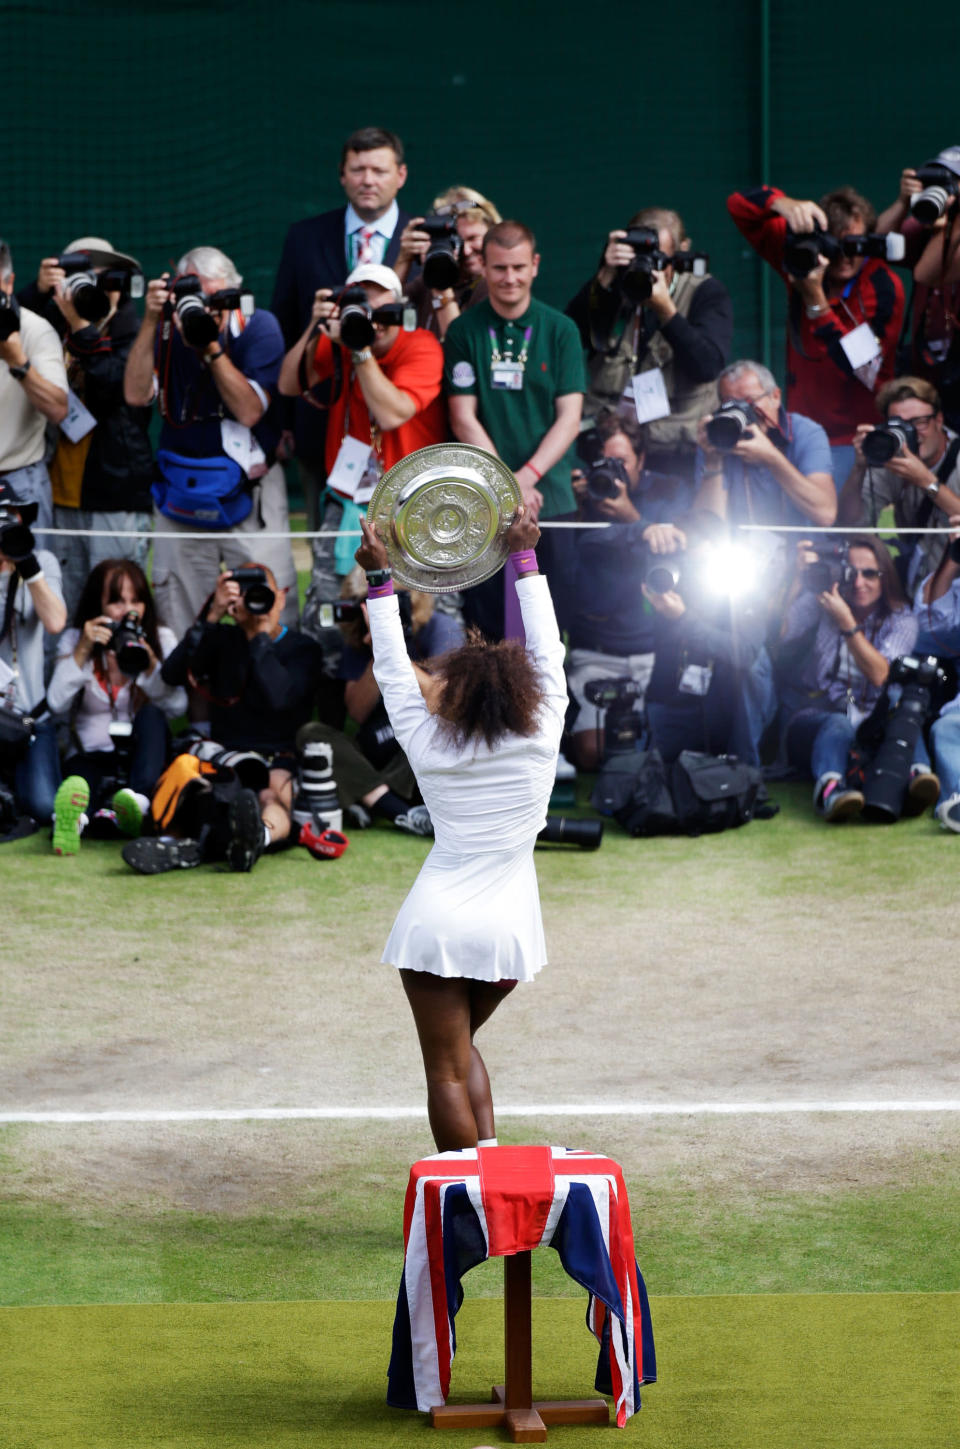 Serena Williams of the USA lifts the winners trophy and celebrates after her Ladies Singles final match against Agnieszka Radwanska of Poland on day twelve of the Wimbledon Lawn Tennis Championships at the All England Lawn Tennis and Croquet Club on July 7, 2012 in London, England. (Photo by Anja Niedringhaus/Pool/Getty Images)